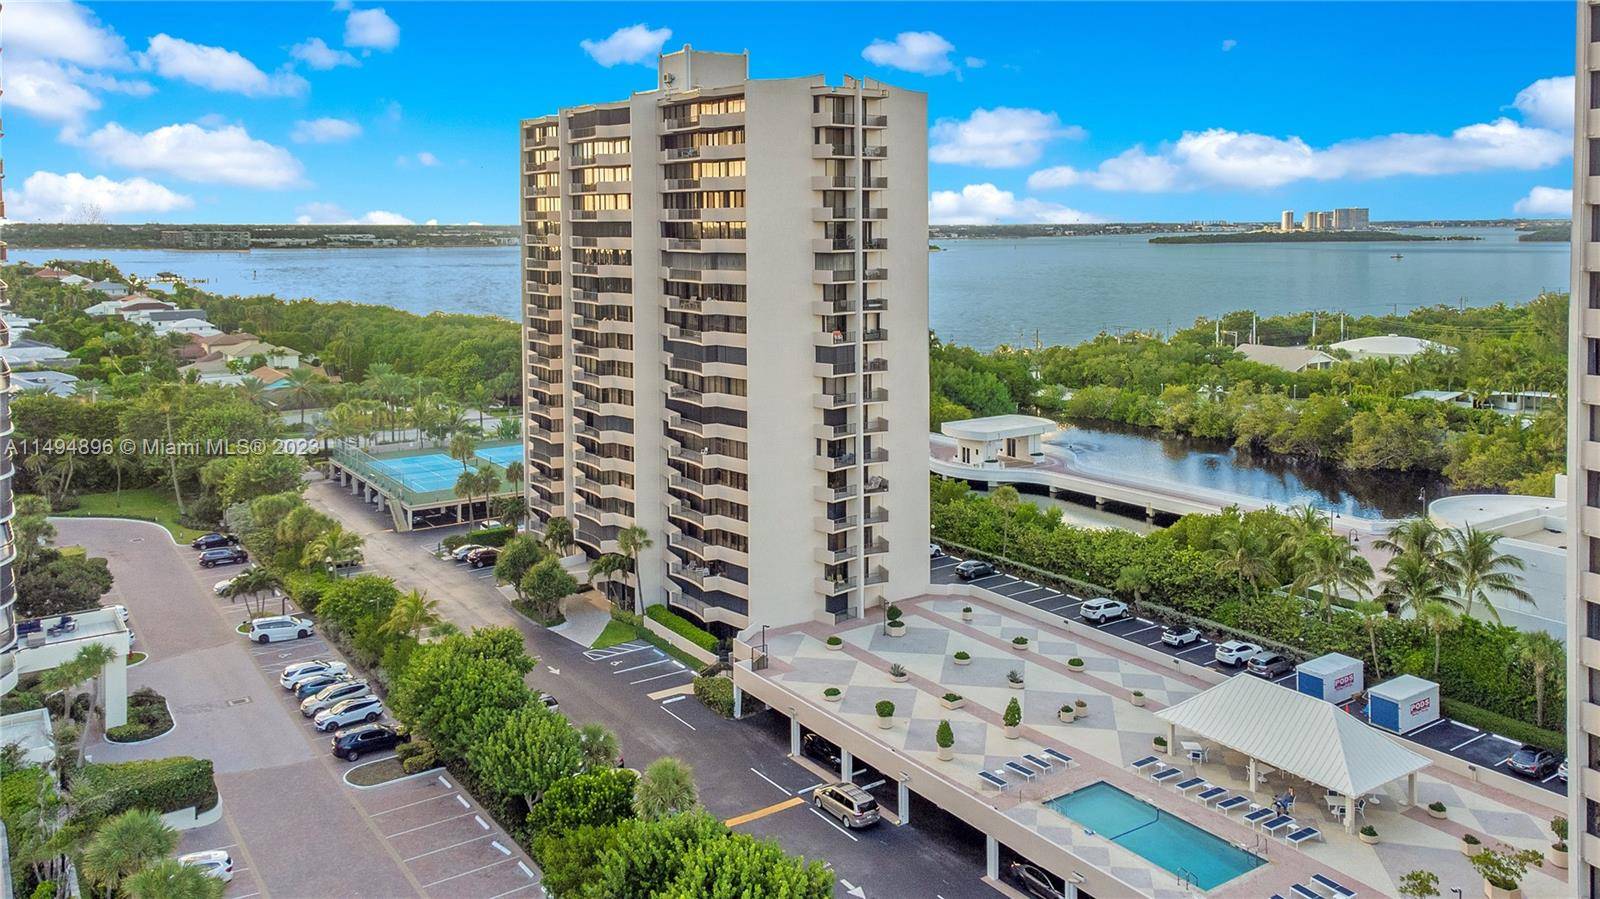 Welcome to this 2 2 oceanfront condo at Cote D'Azur, nestled on the pristine shores of Singer Island.